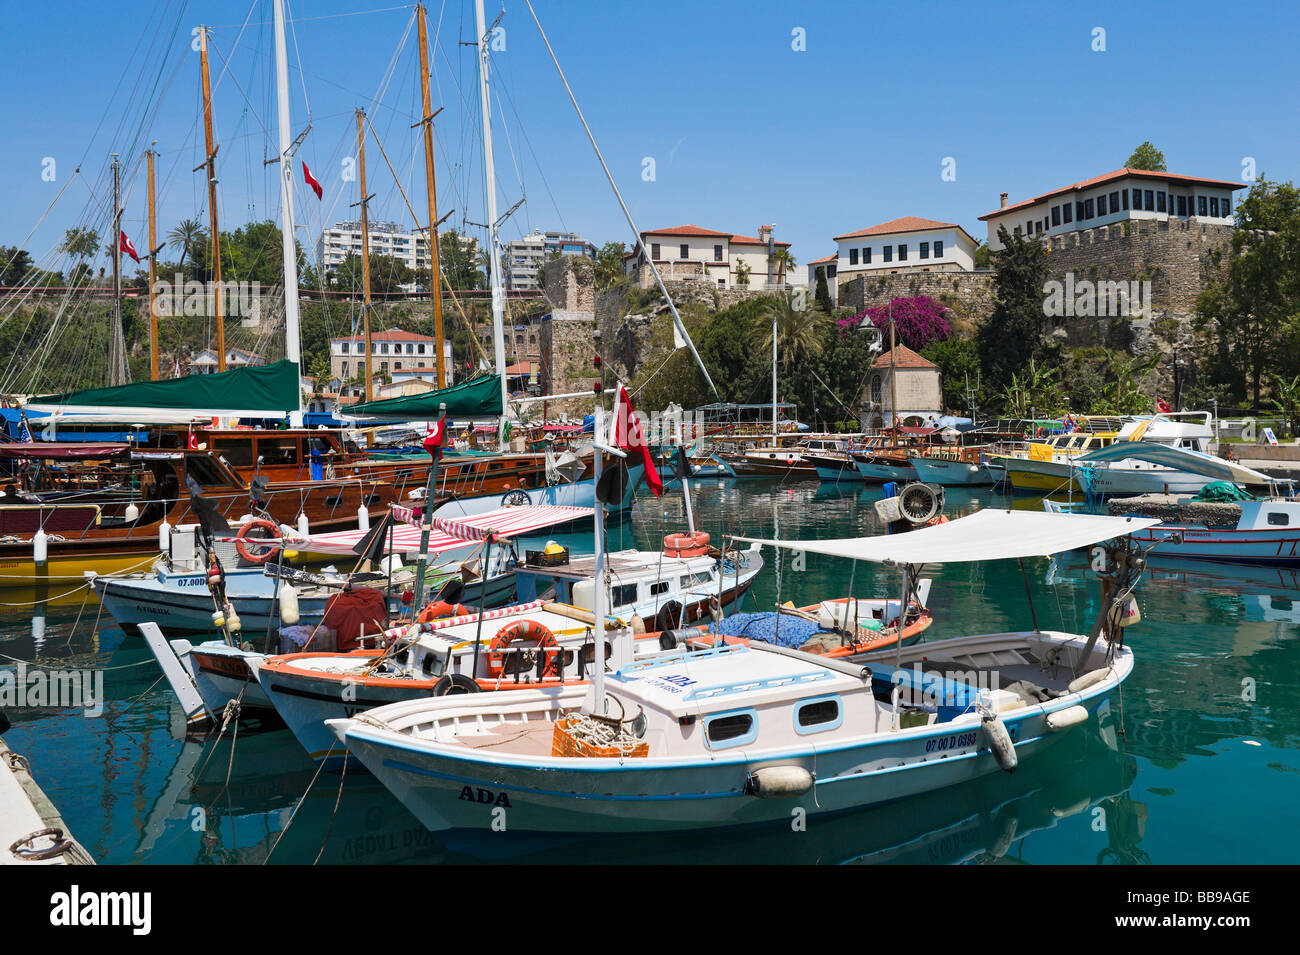 Local fishing boats in the harbour in Kaleici (the Old Town), Antalya, Mediterranean Coast, Turkey Stock Photo